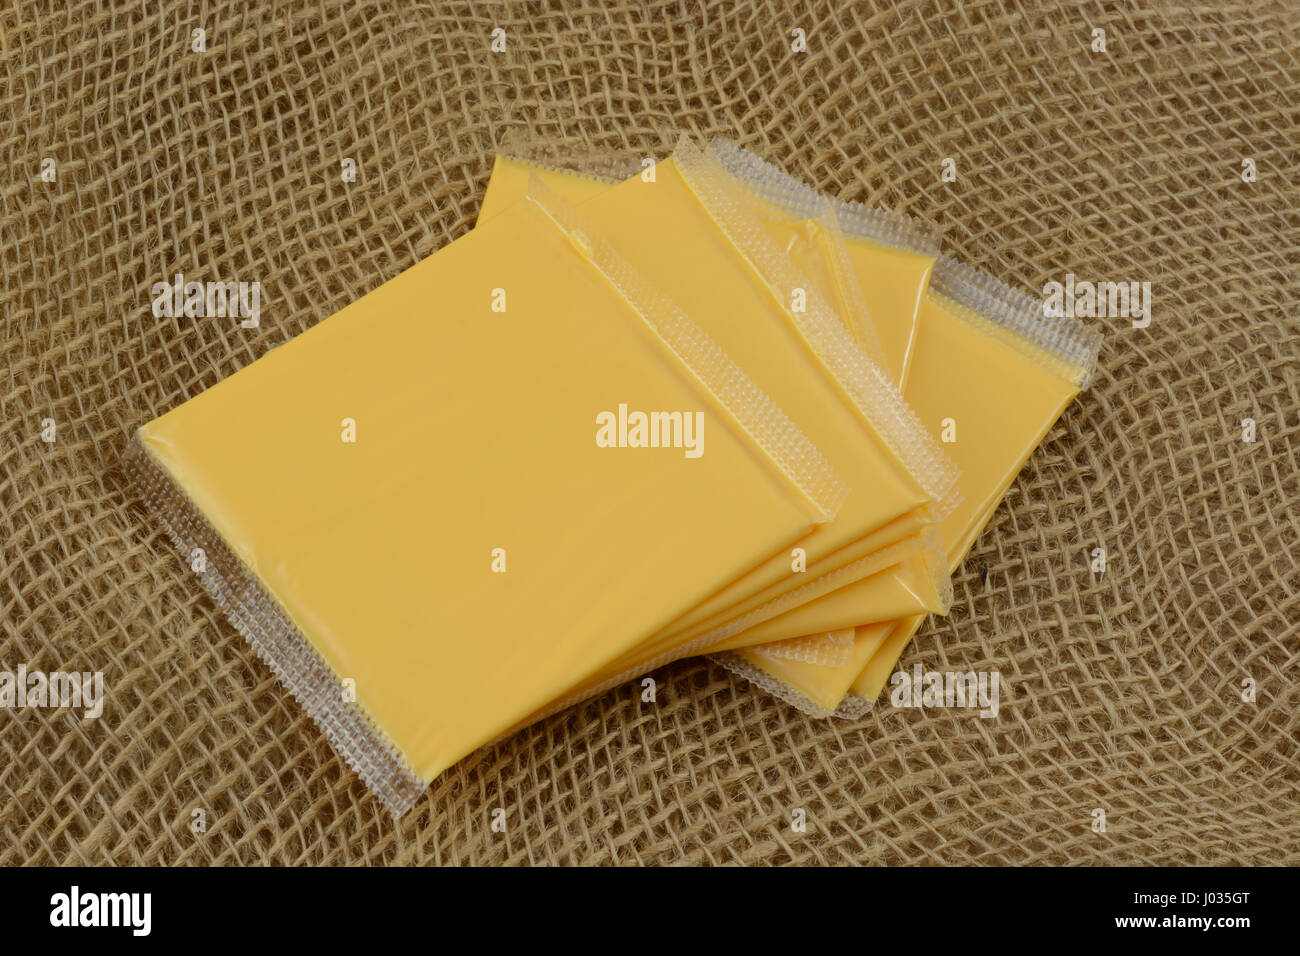 Stack of American cheese slices in plastic packaging on burlap Stock Photo